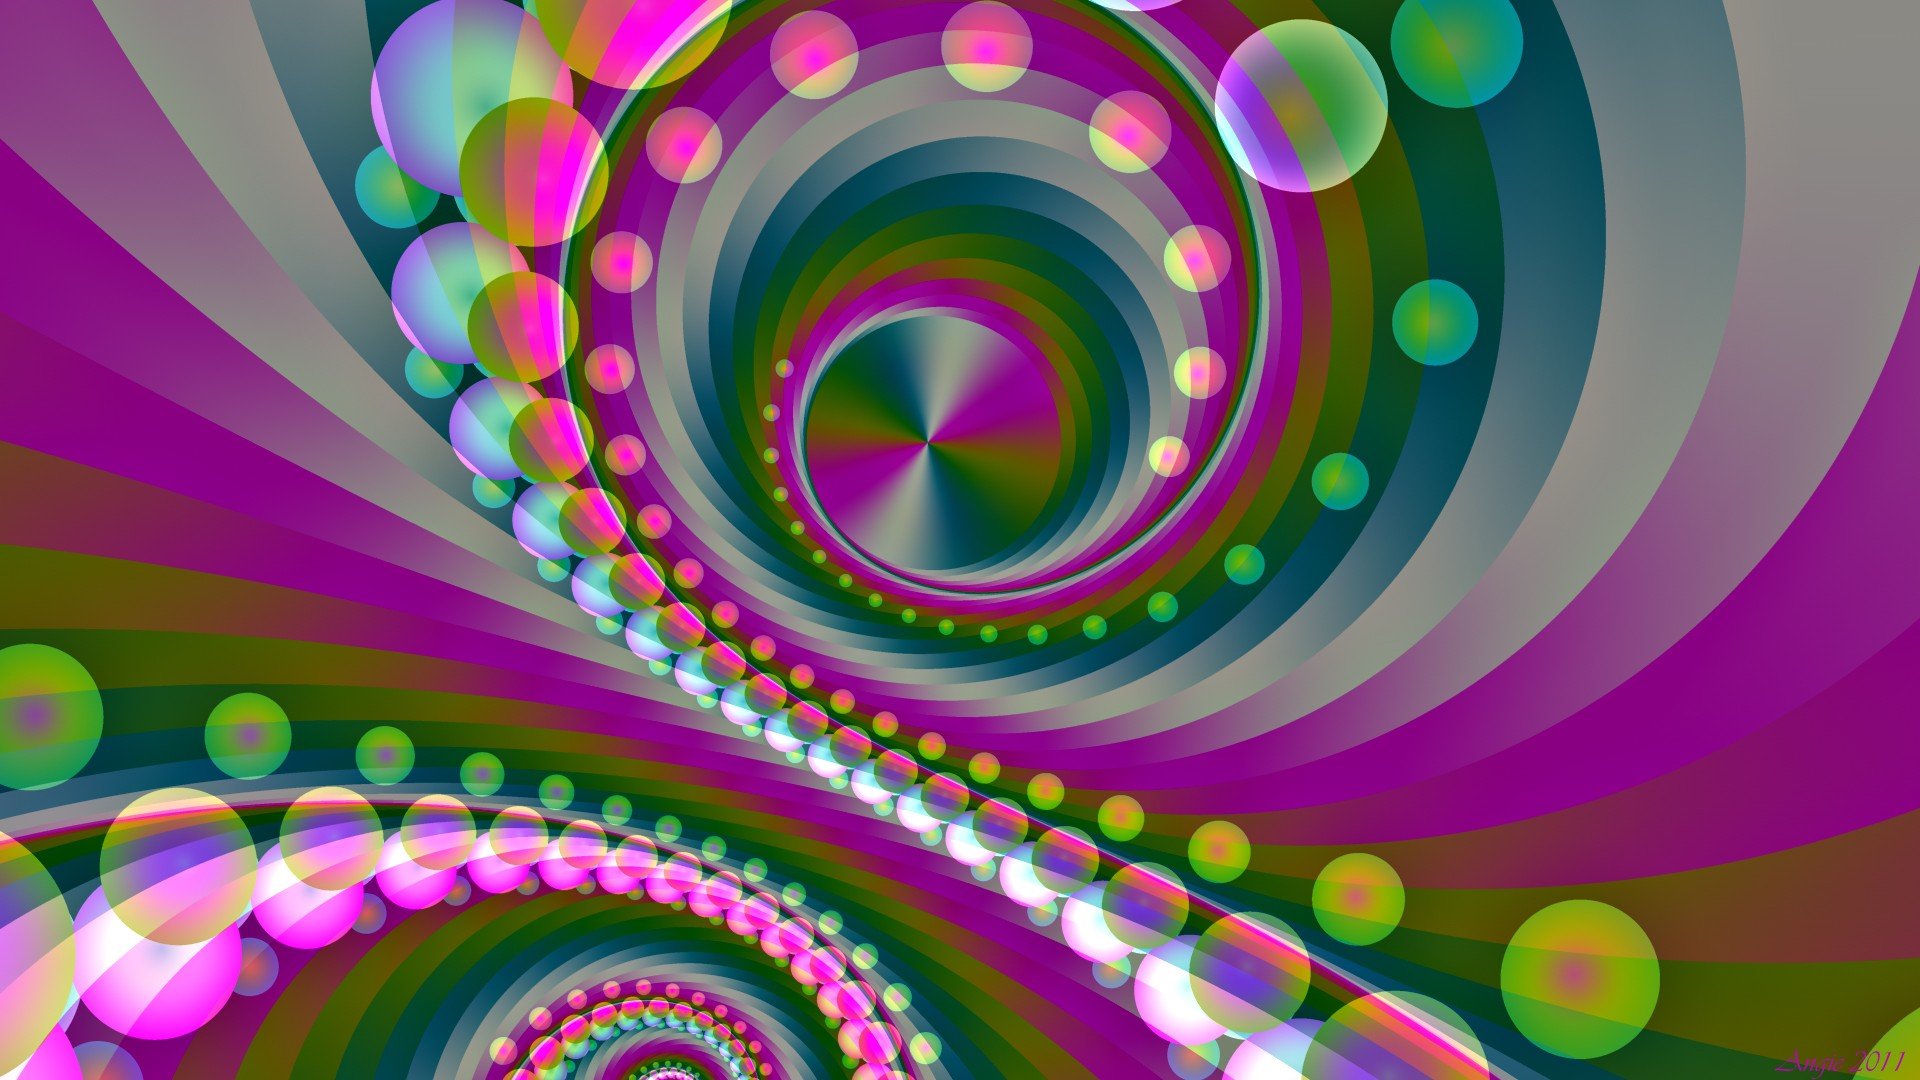 Abstract Multicolor Patterns Psychedelic Digital Art Background